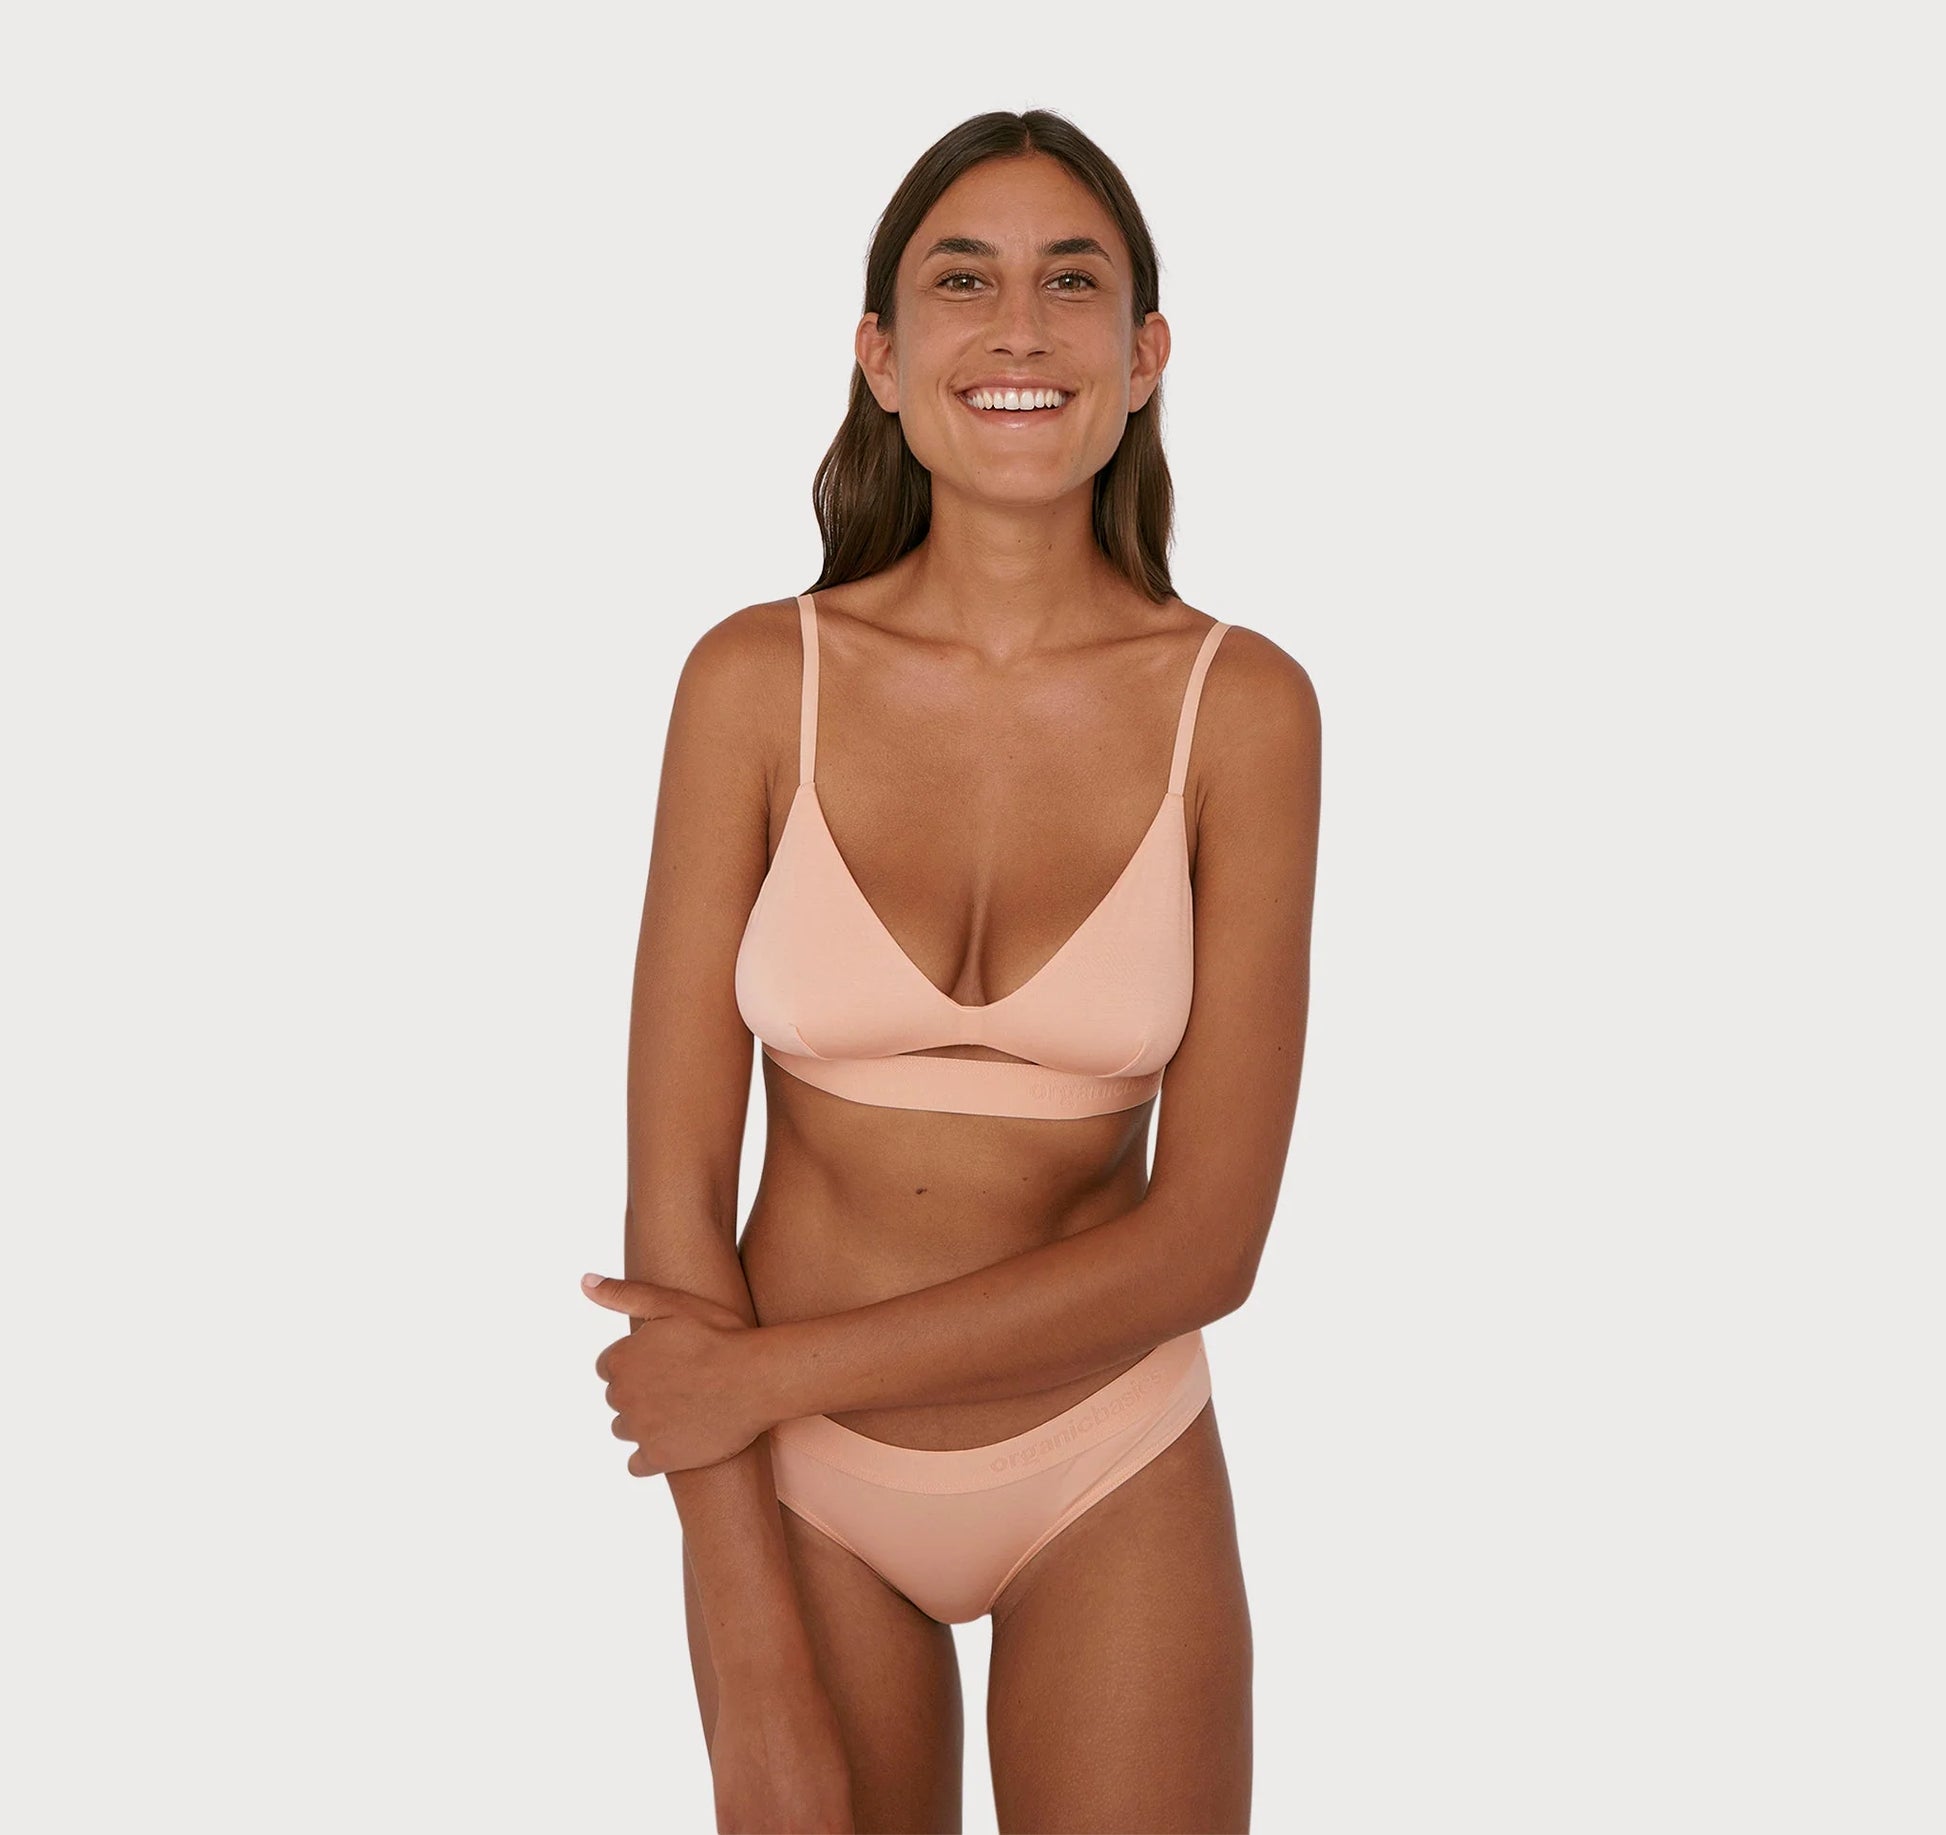 A woman in an adjustable Soft Touch Bralette - Soft Pink bikini by Organic Basics.